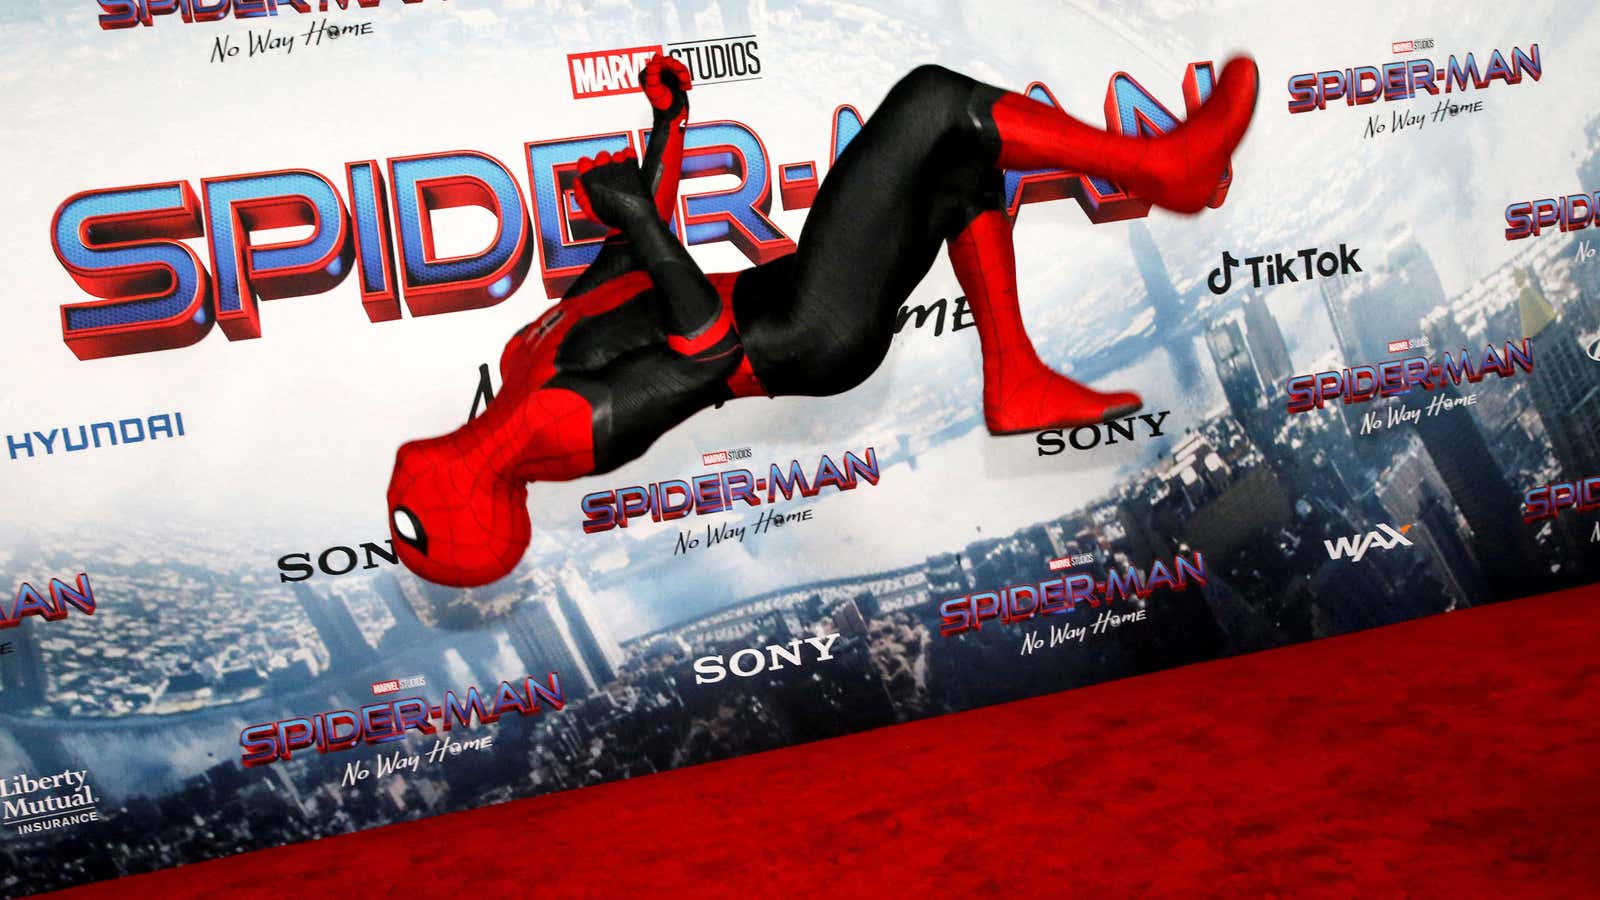 “Spider-Man: No Way Home” earned $1 billion without a release in China